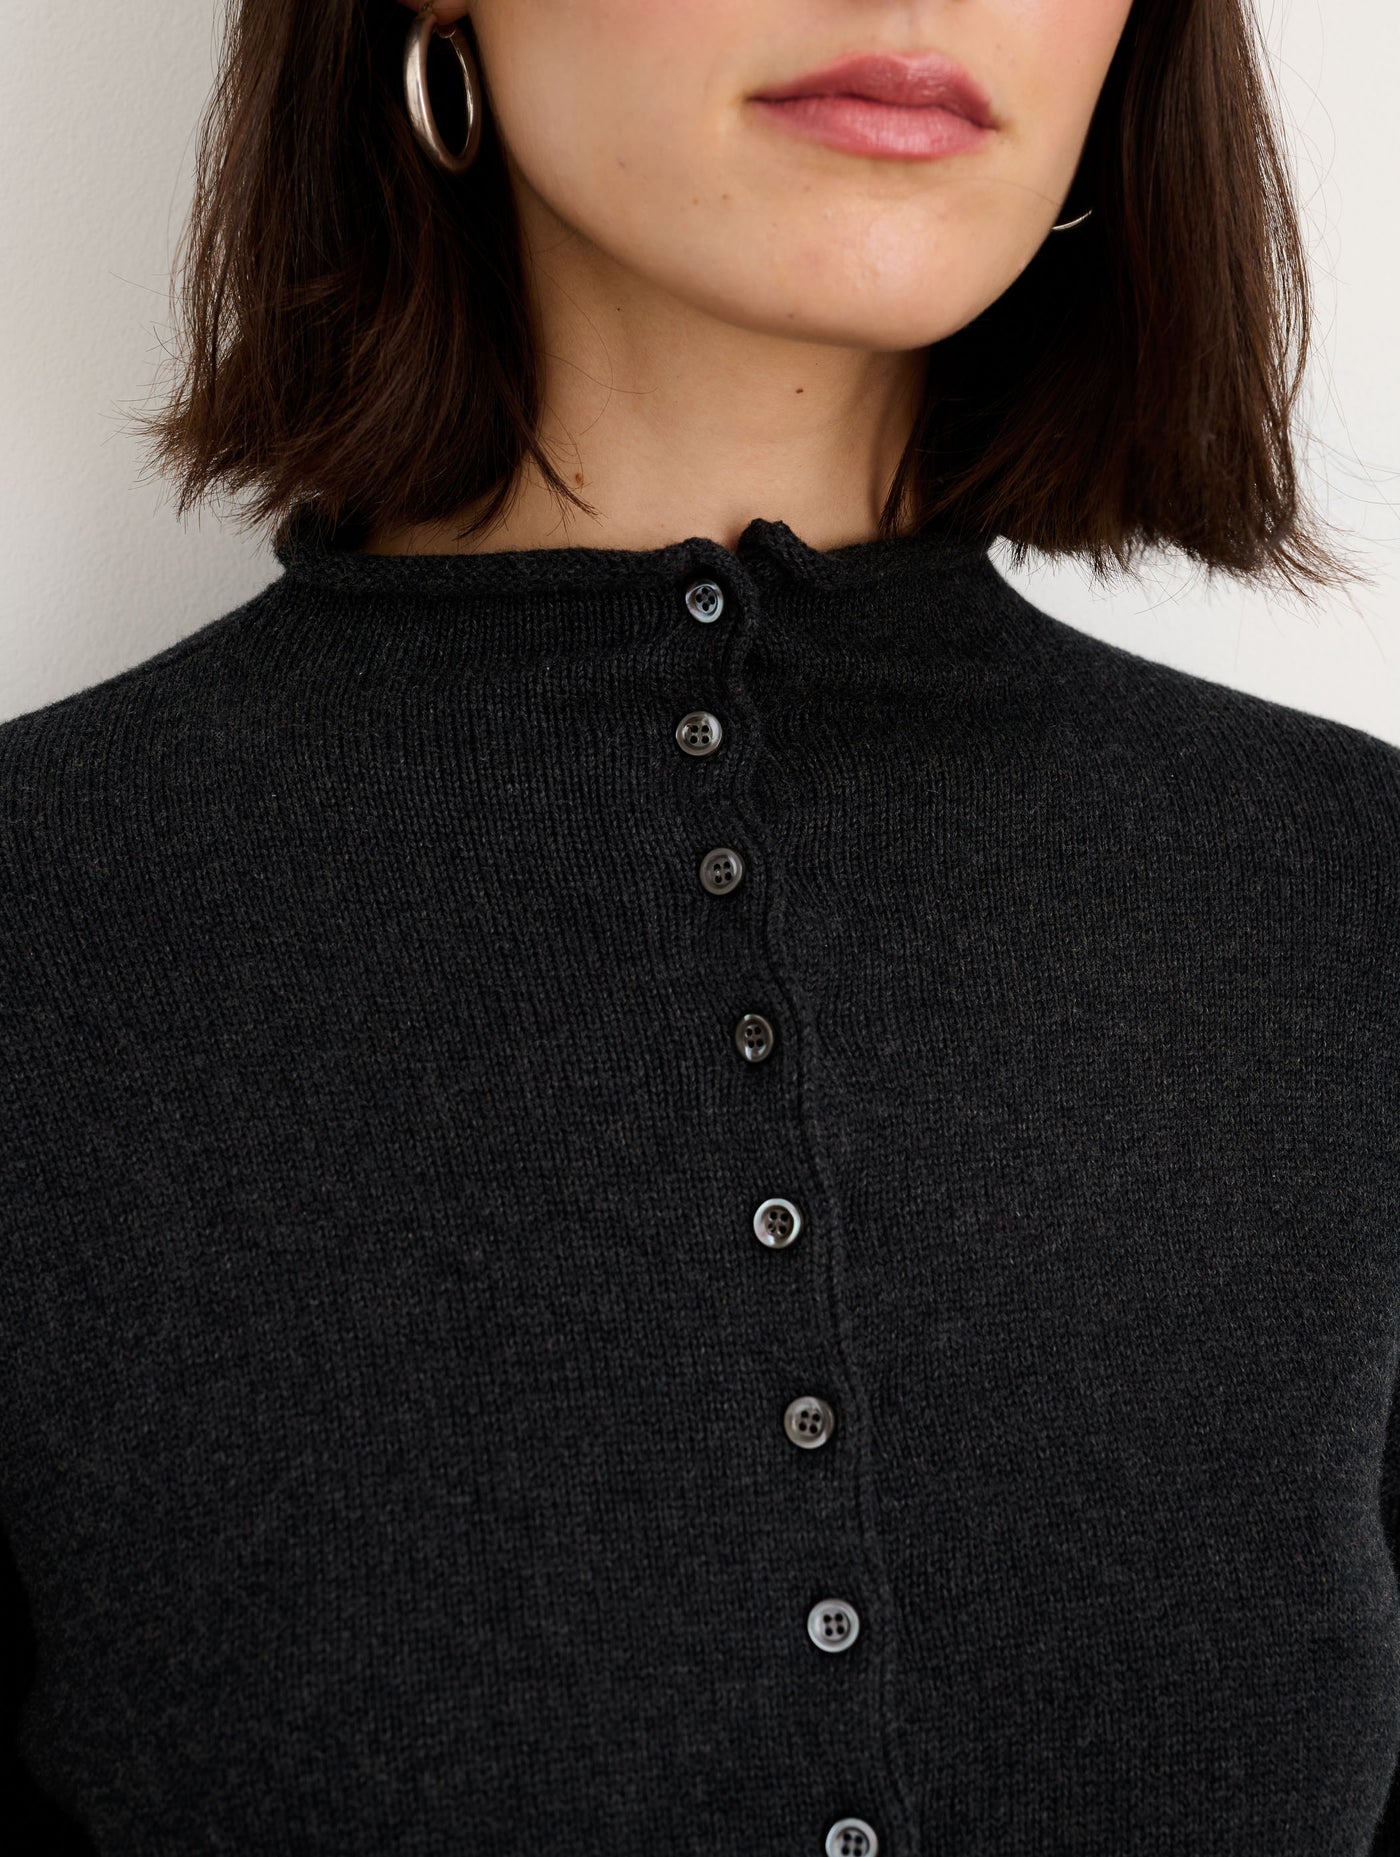 Taylor Rollneck Cardigan in Cotton Cashmere